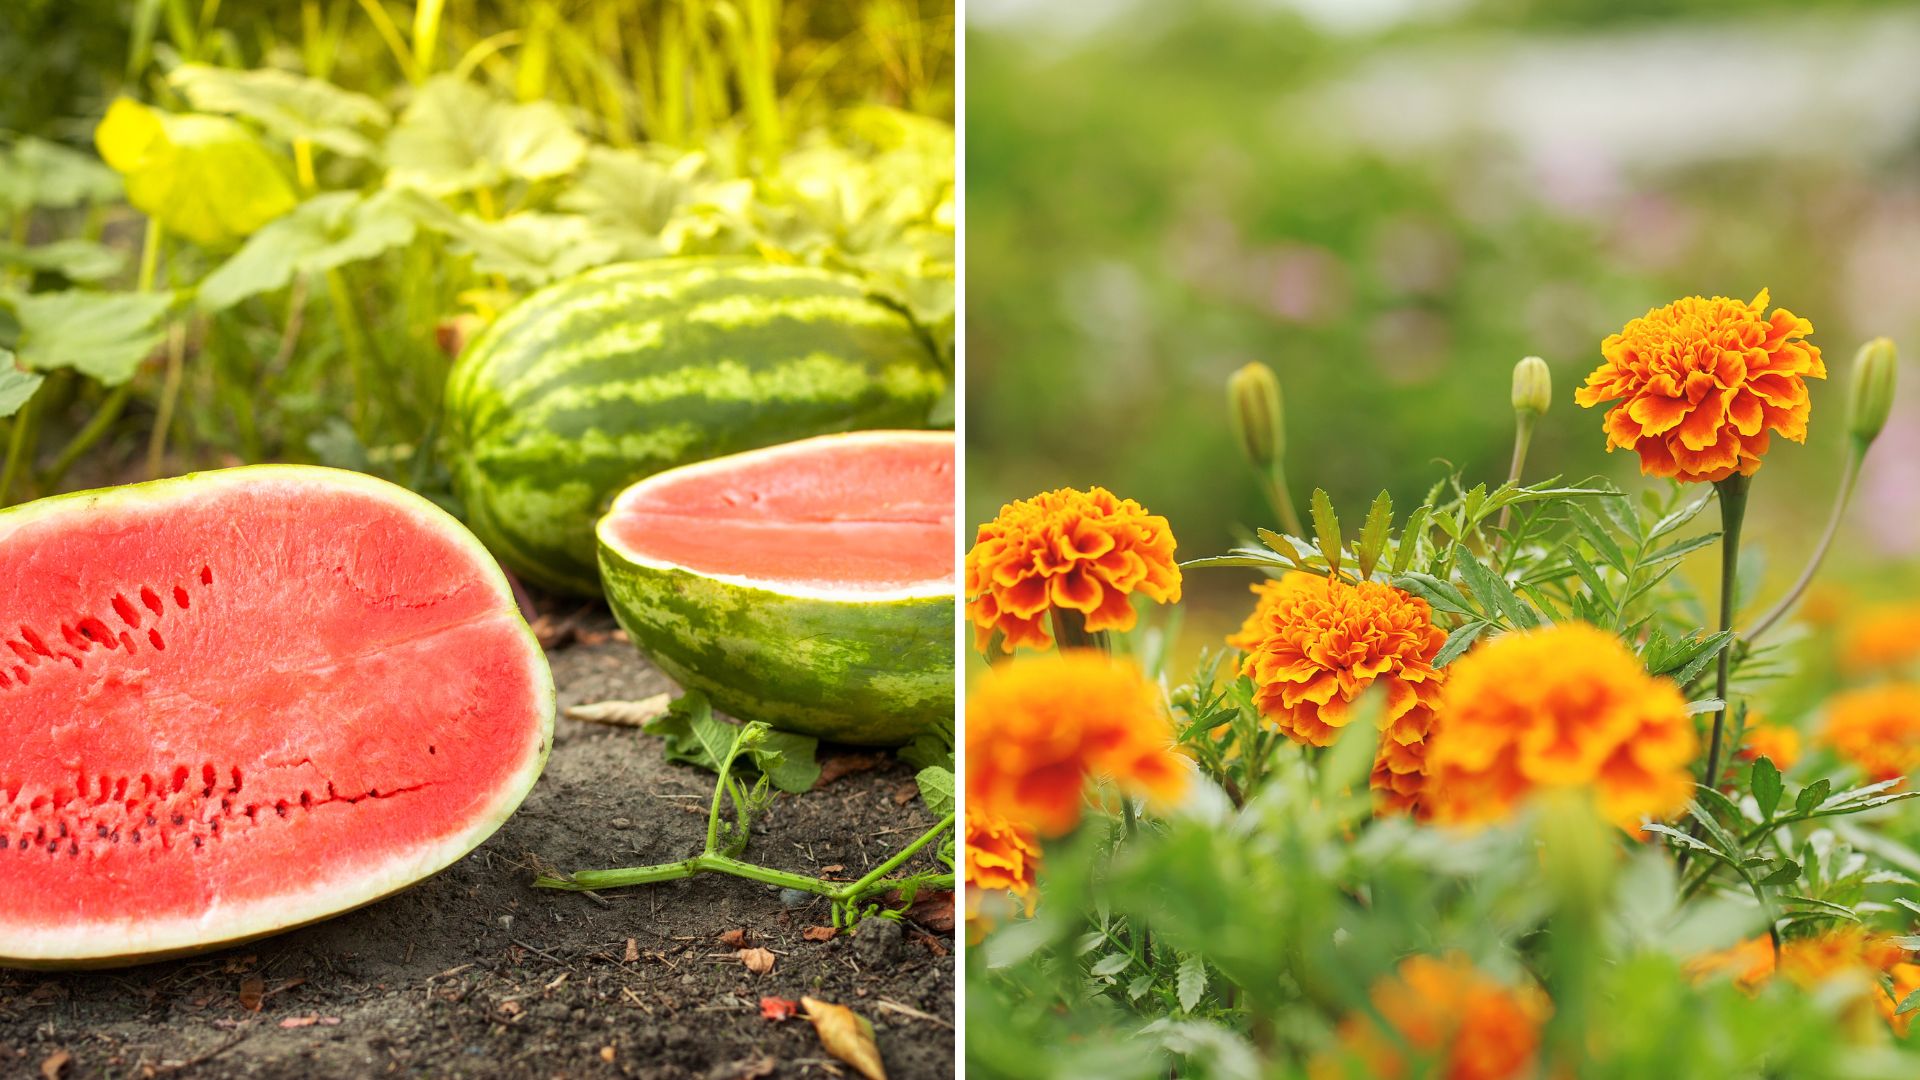 These Are The 7 Perfect Companion Plants For Watermelon That Will Make It Sweeter Than Ever Before